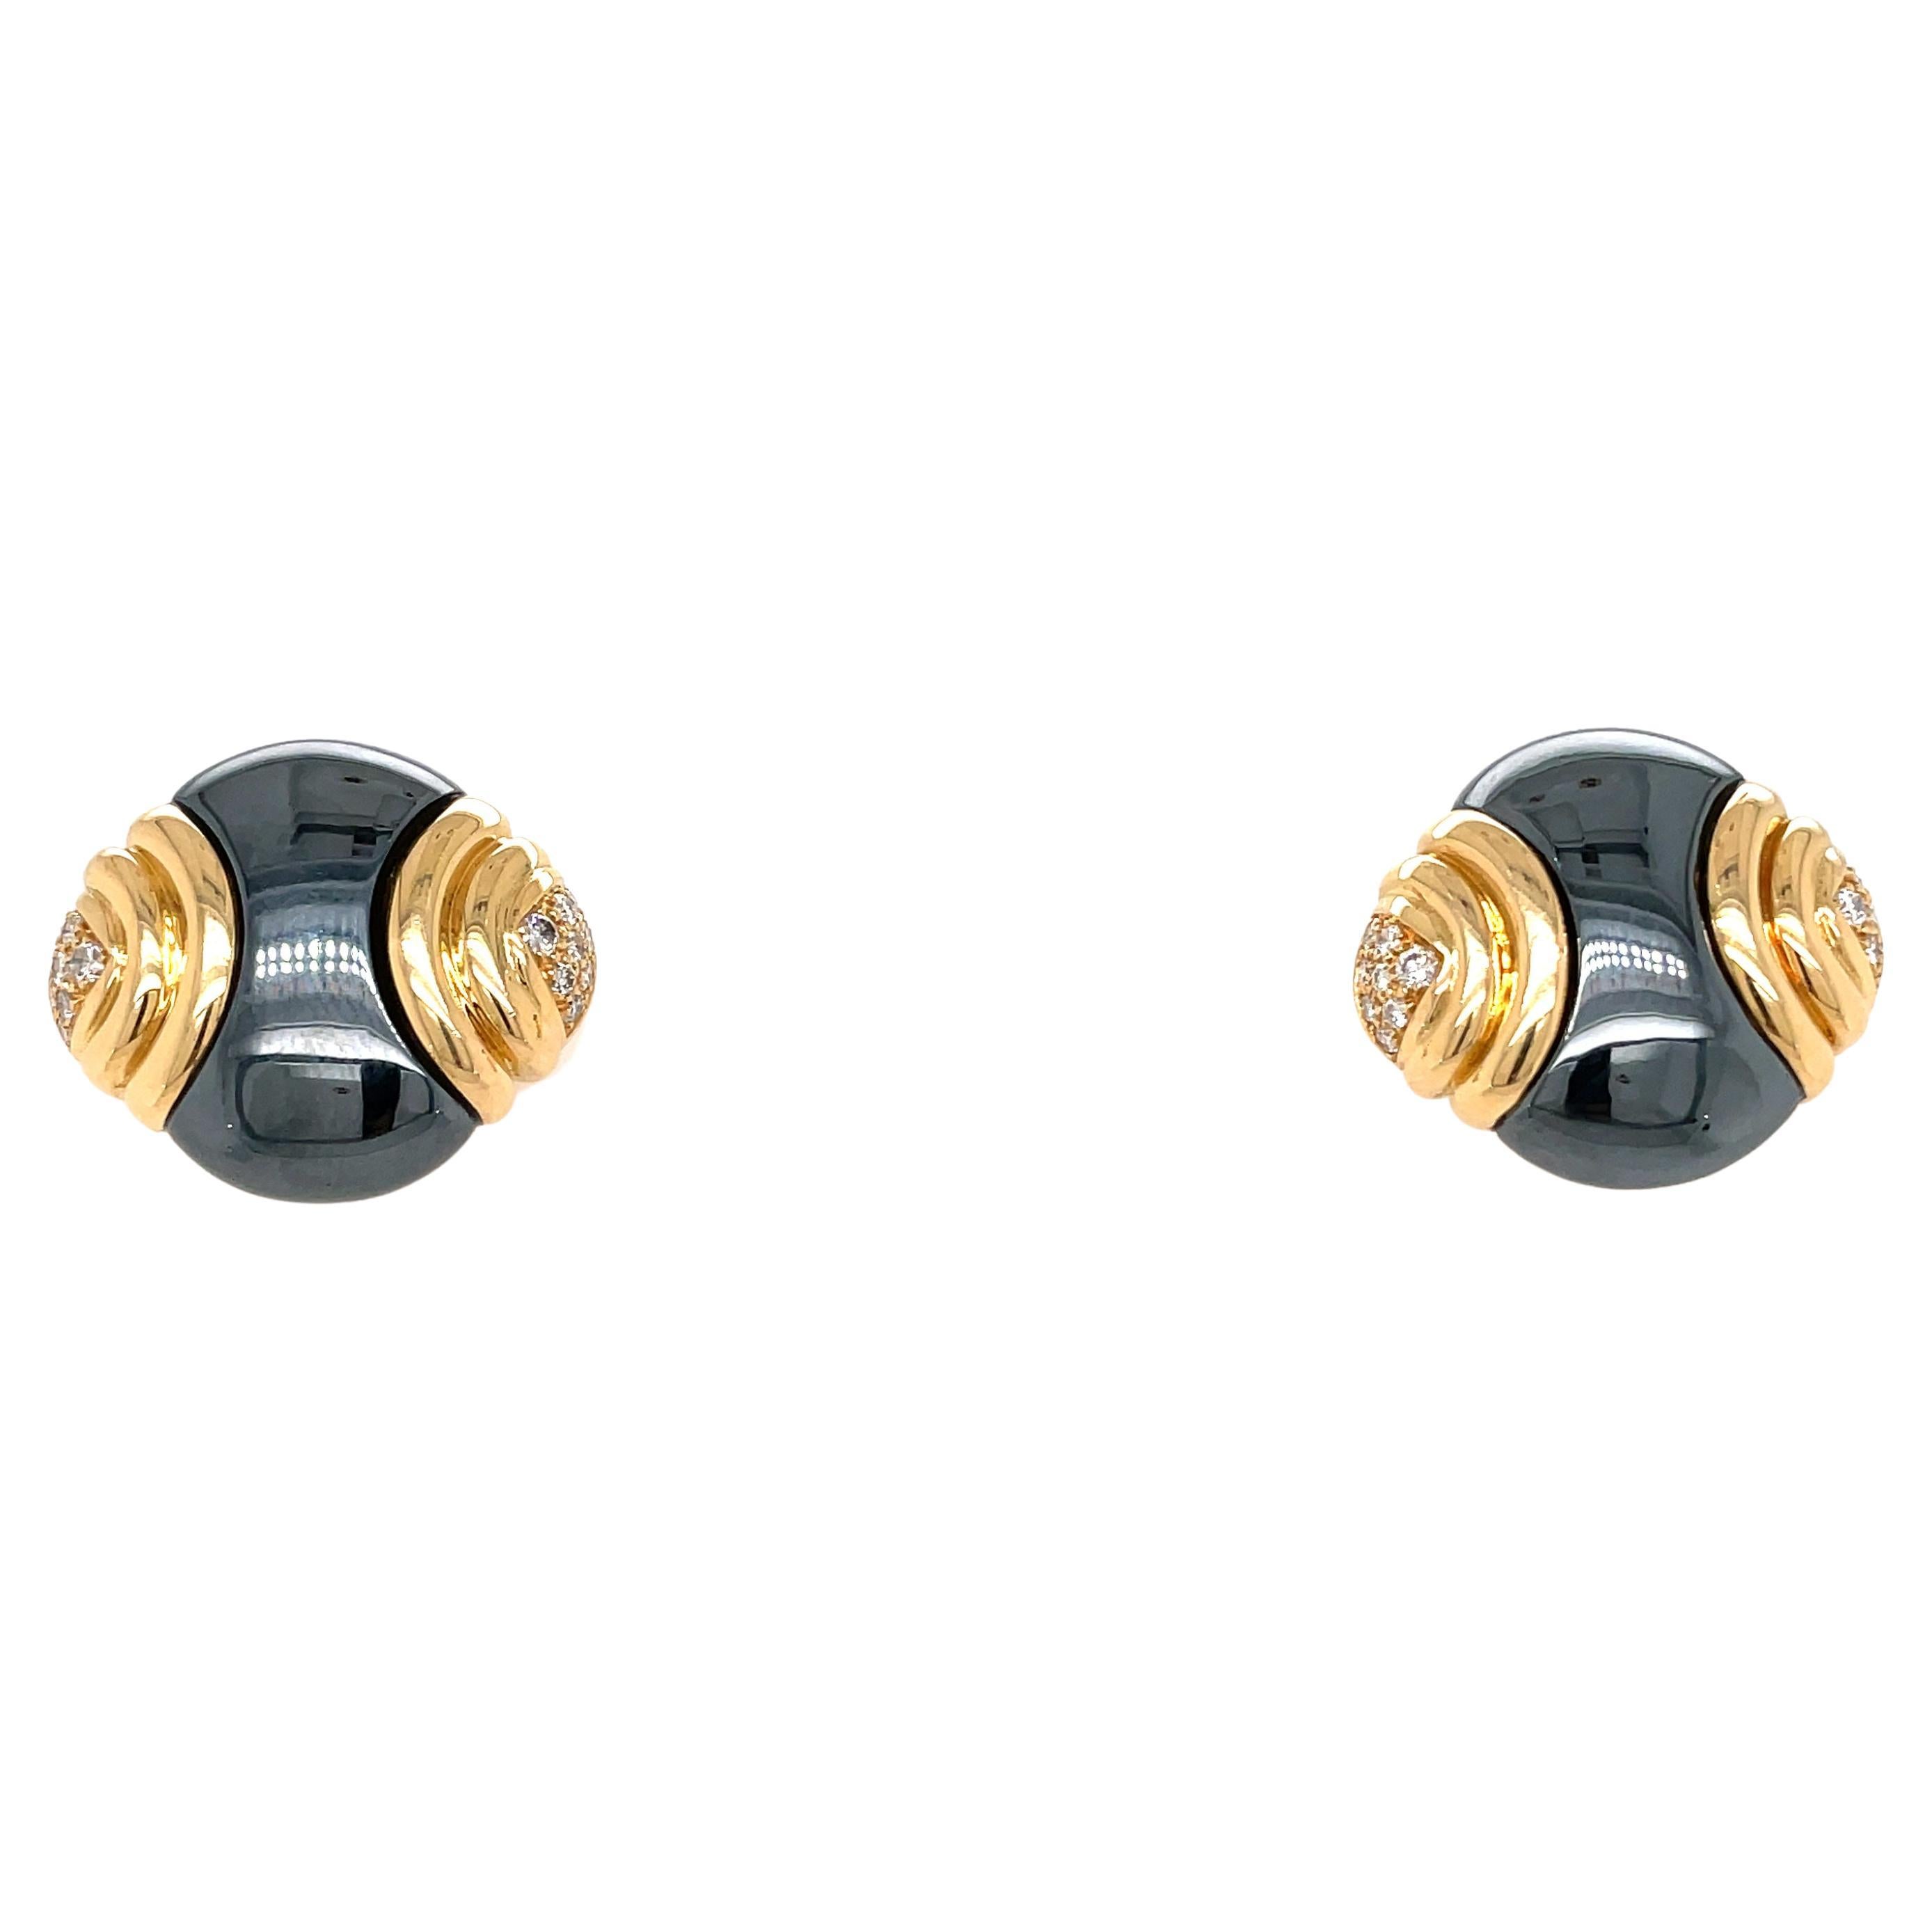 Iconic Bulgari design for these Bold rare earrings, designed and made in Italy in solid 18k yellow gold and black hematite, they feature sparkling colorless round brilliant cut diamonds at the two groove designed sides. Made in Italy, circa